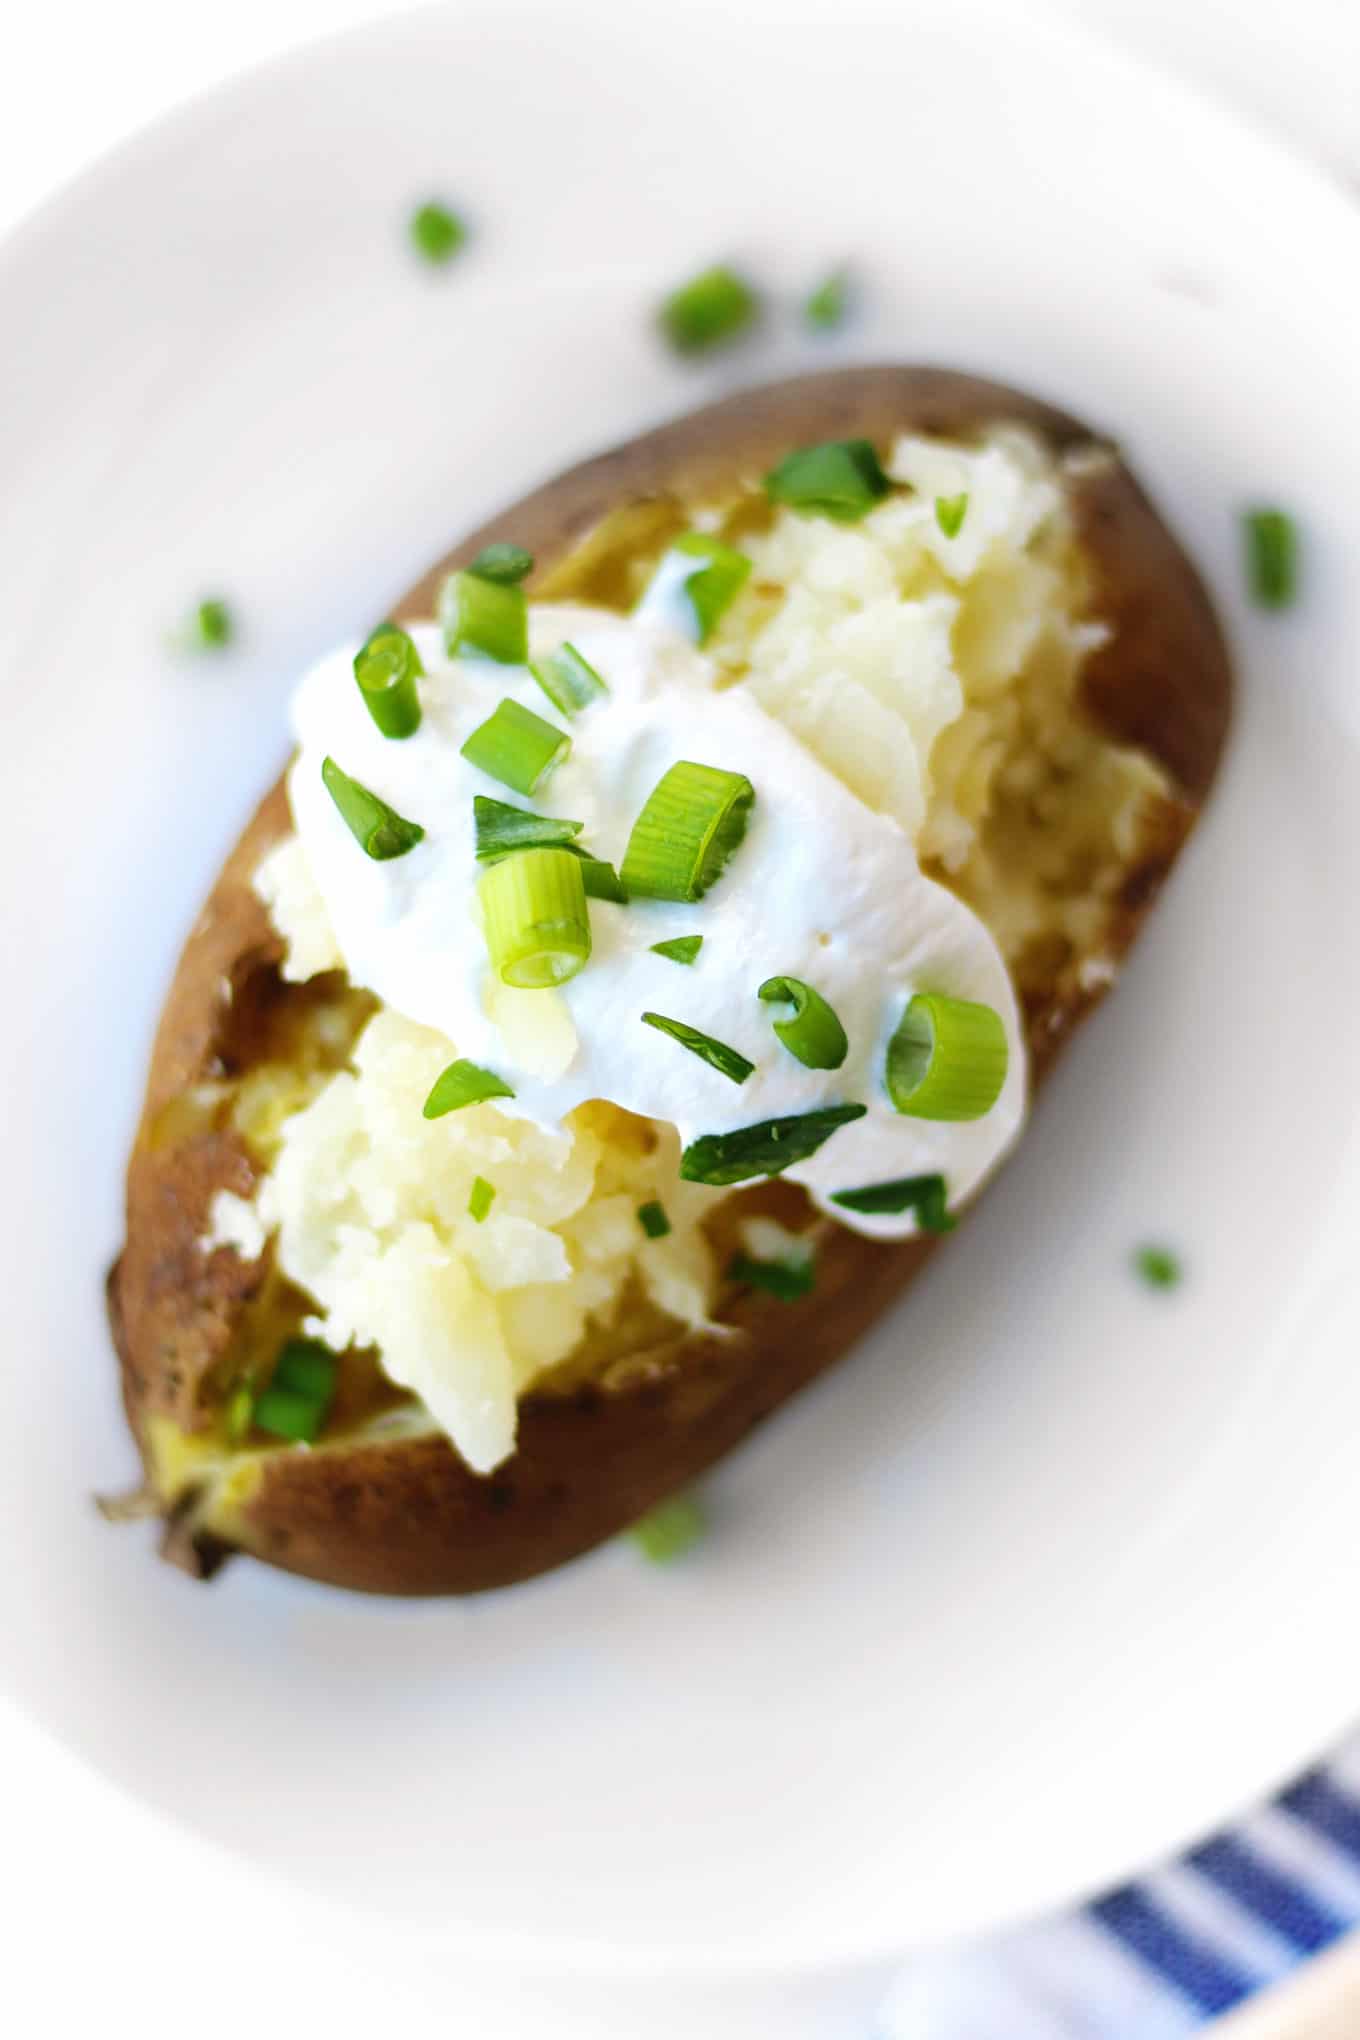 An overhead photo of a baked potato cooked and topped with sour cream and green onion pieces.